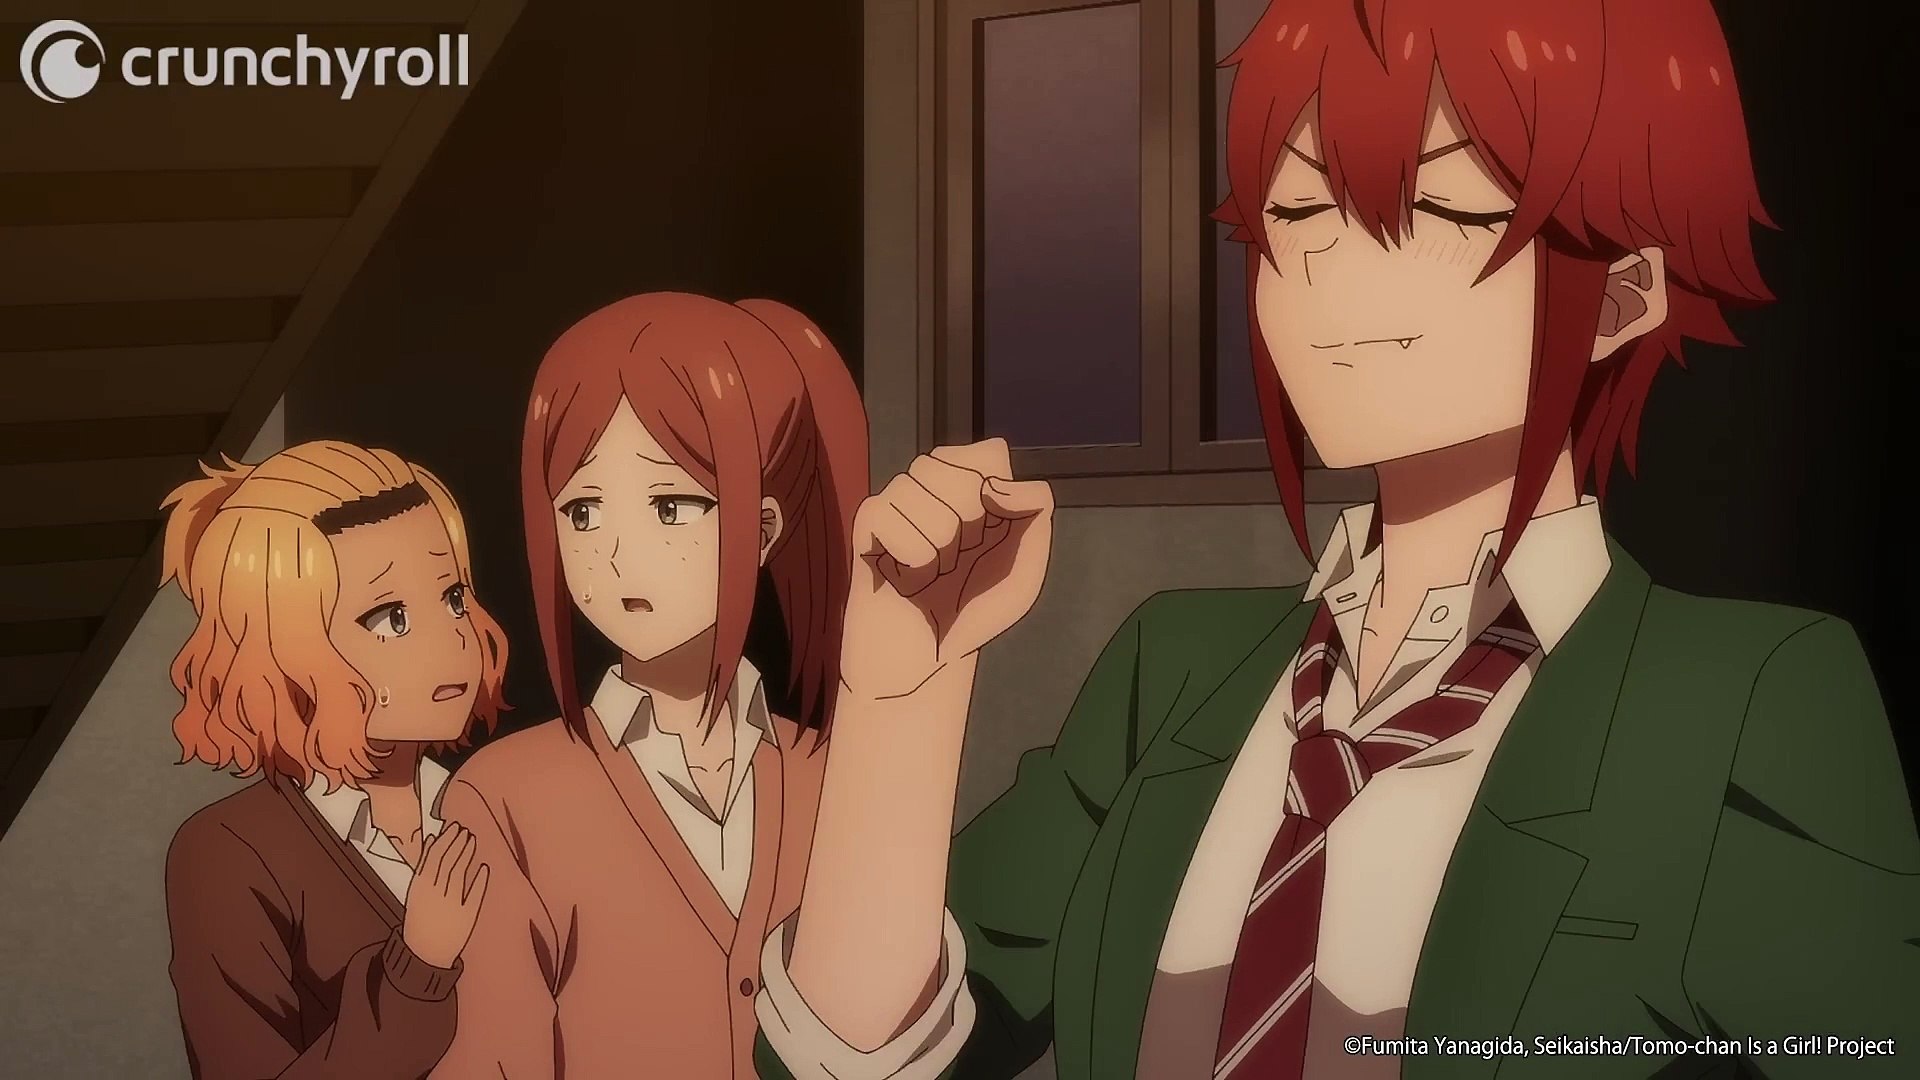 Tomo-chan Is a Girl! - Episode 2 - Dub Available Now on